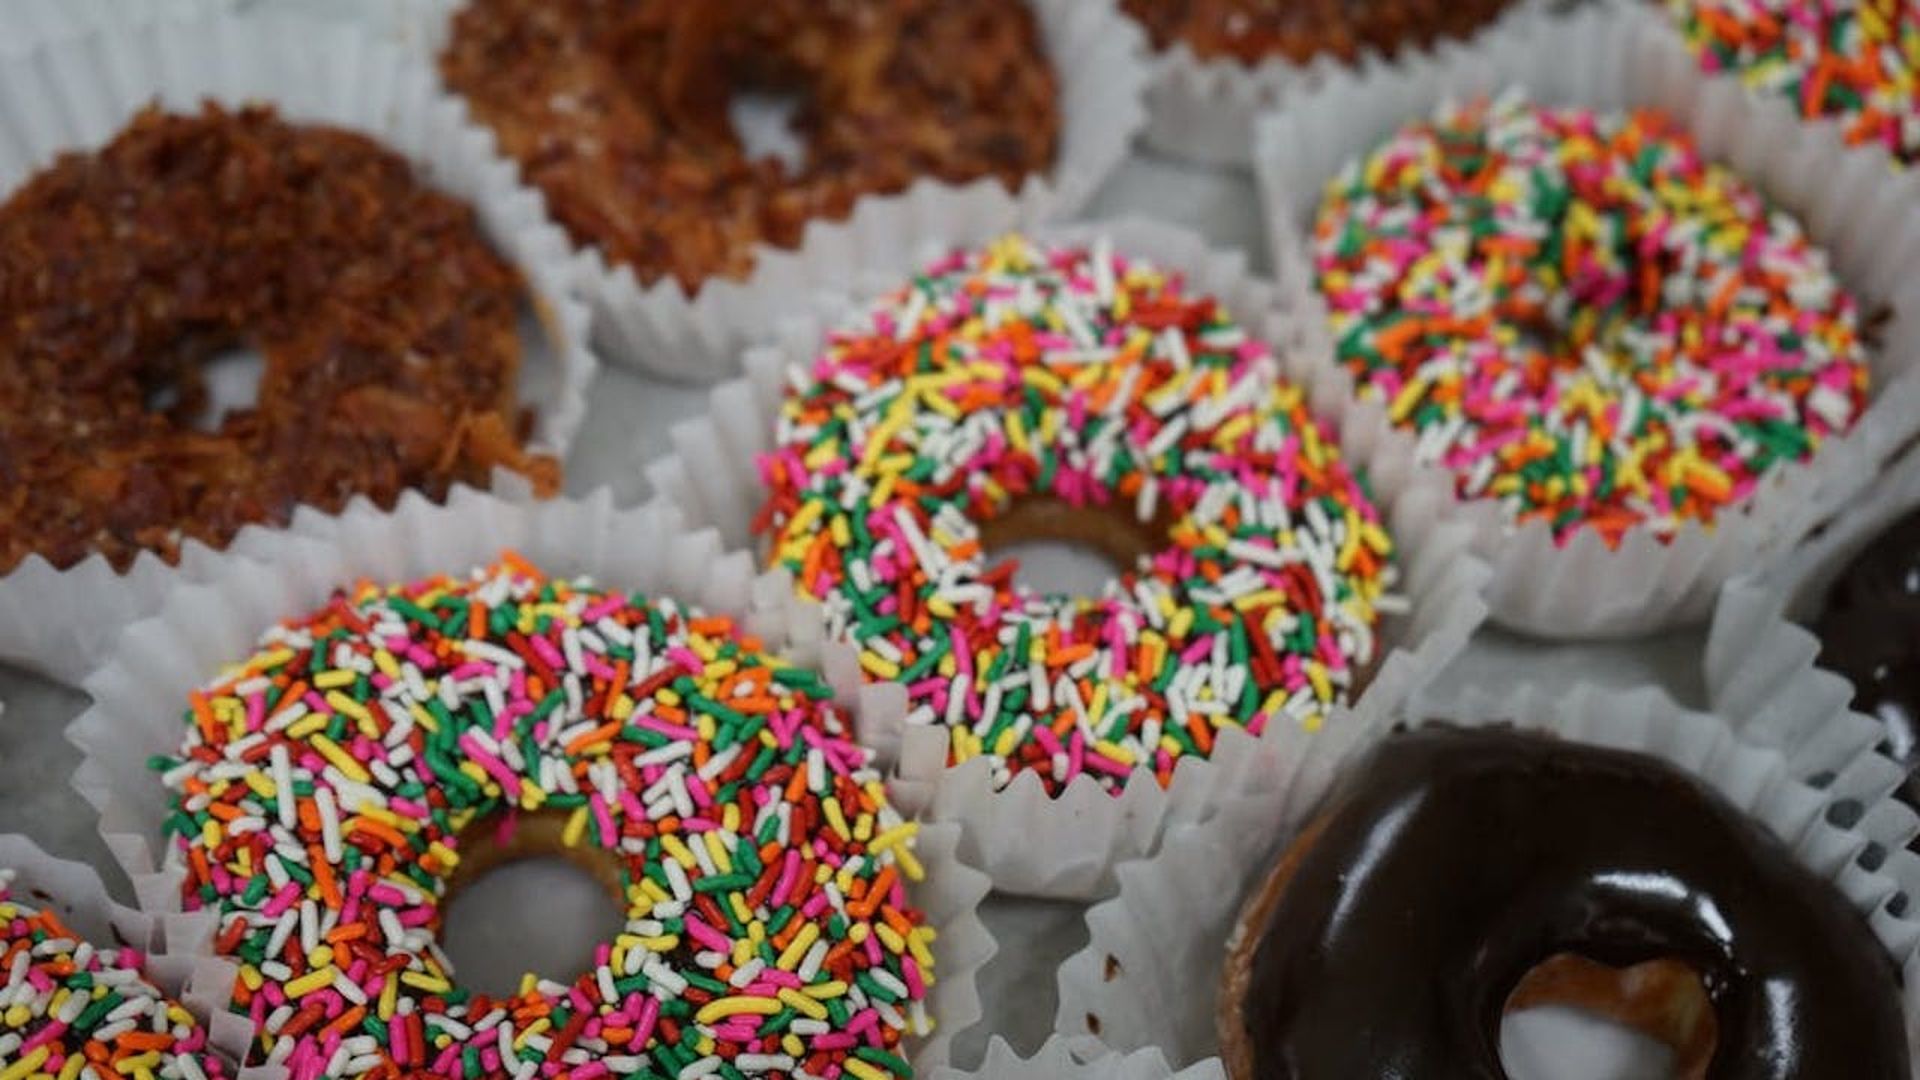 Rows of doughnuts: Coconut on the left, rainbow sprinkles in the middle and chocolate glazed on the right.